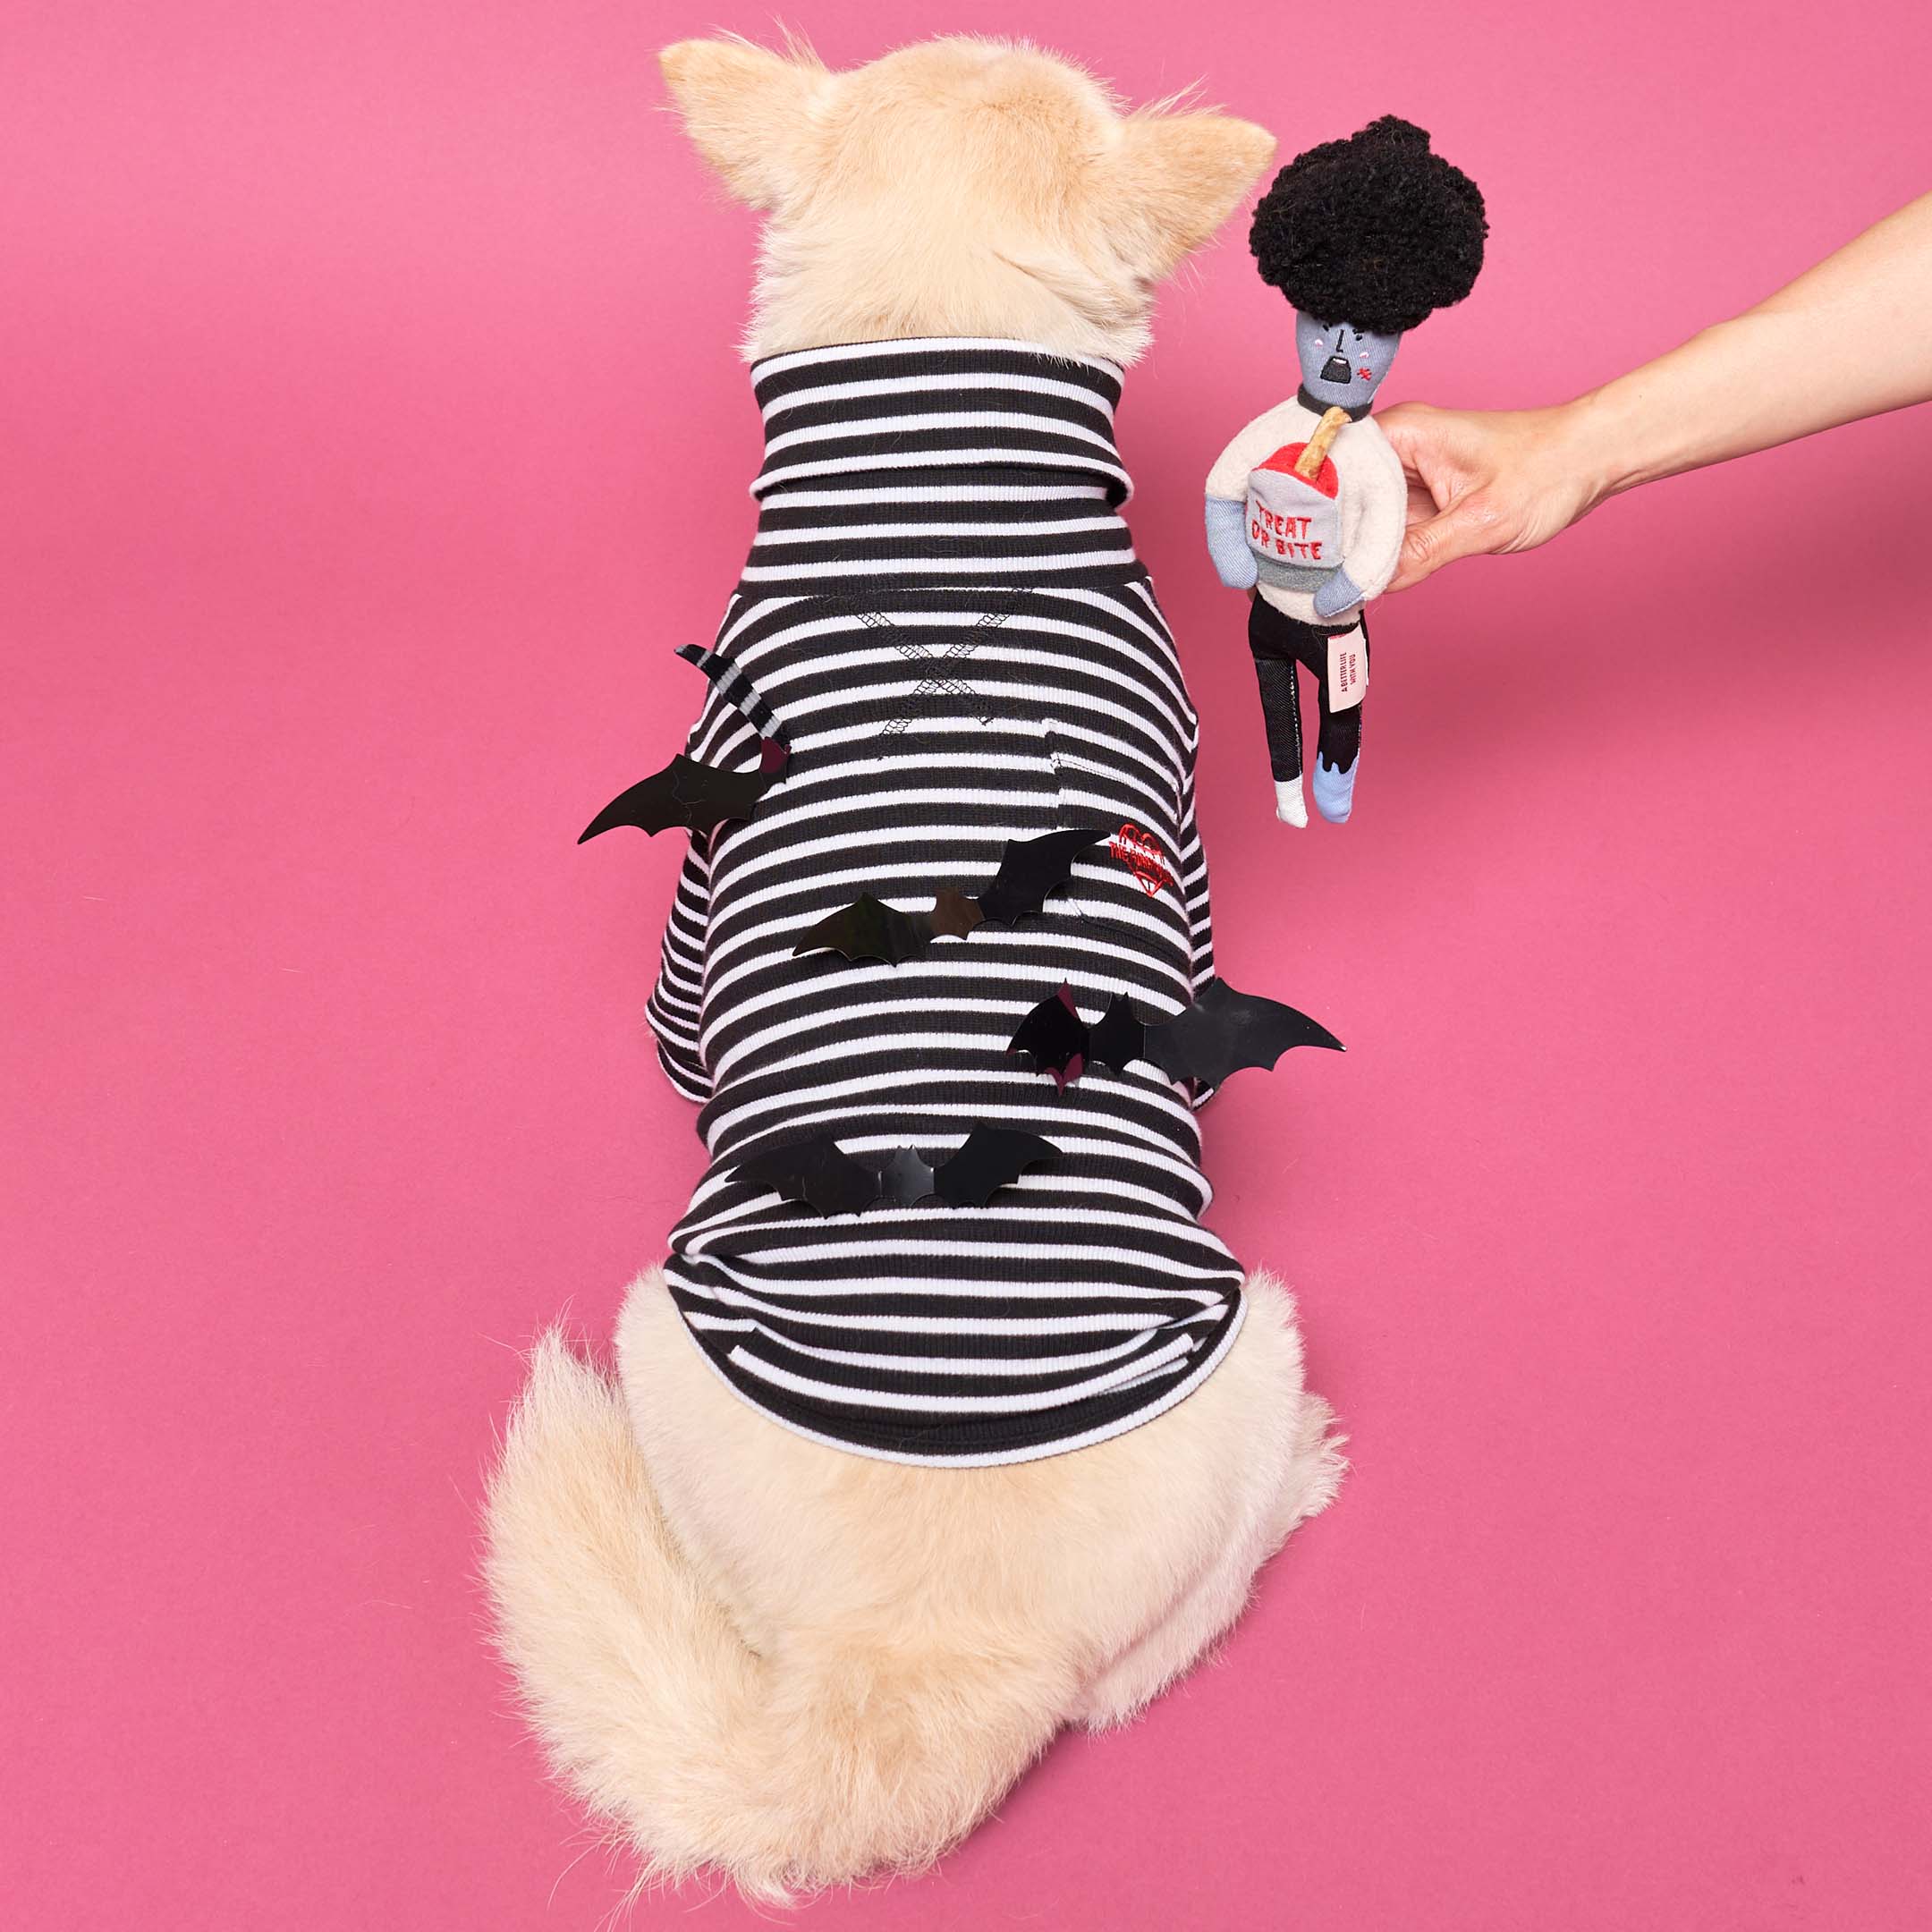 Furry dog in a striped t-shirt focused on a toy being offered by a zombie.